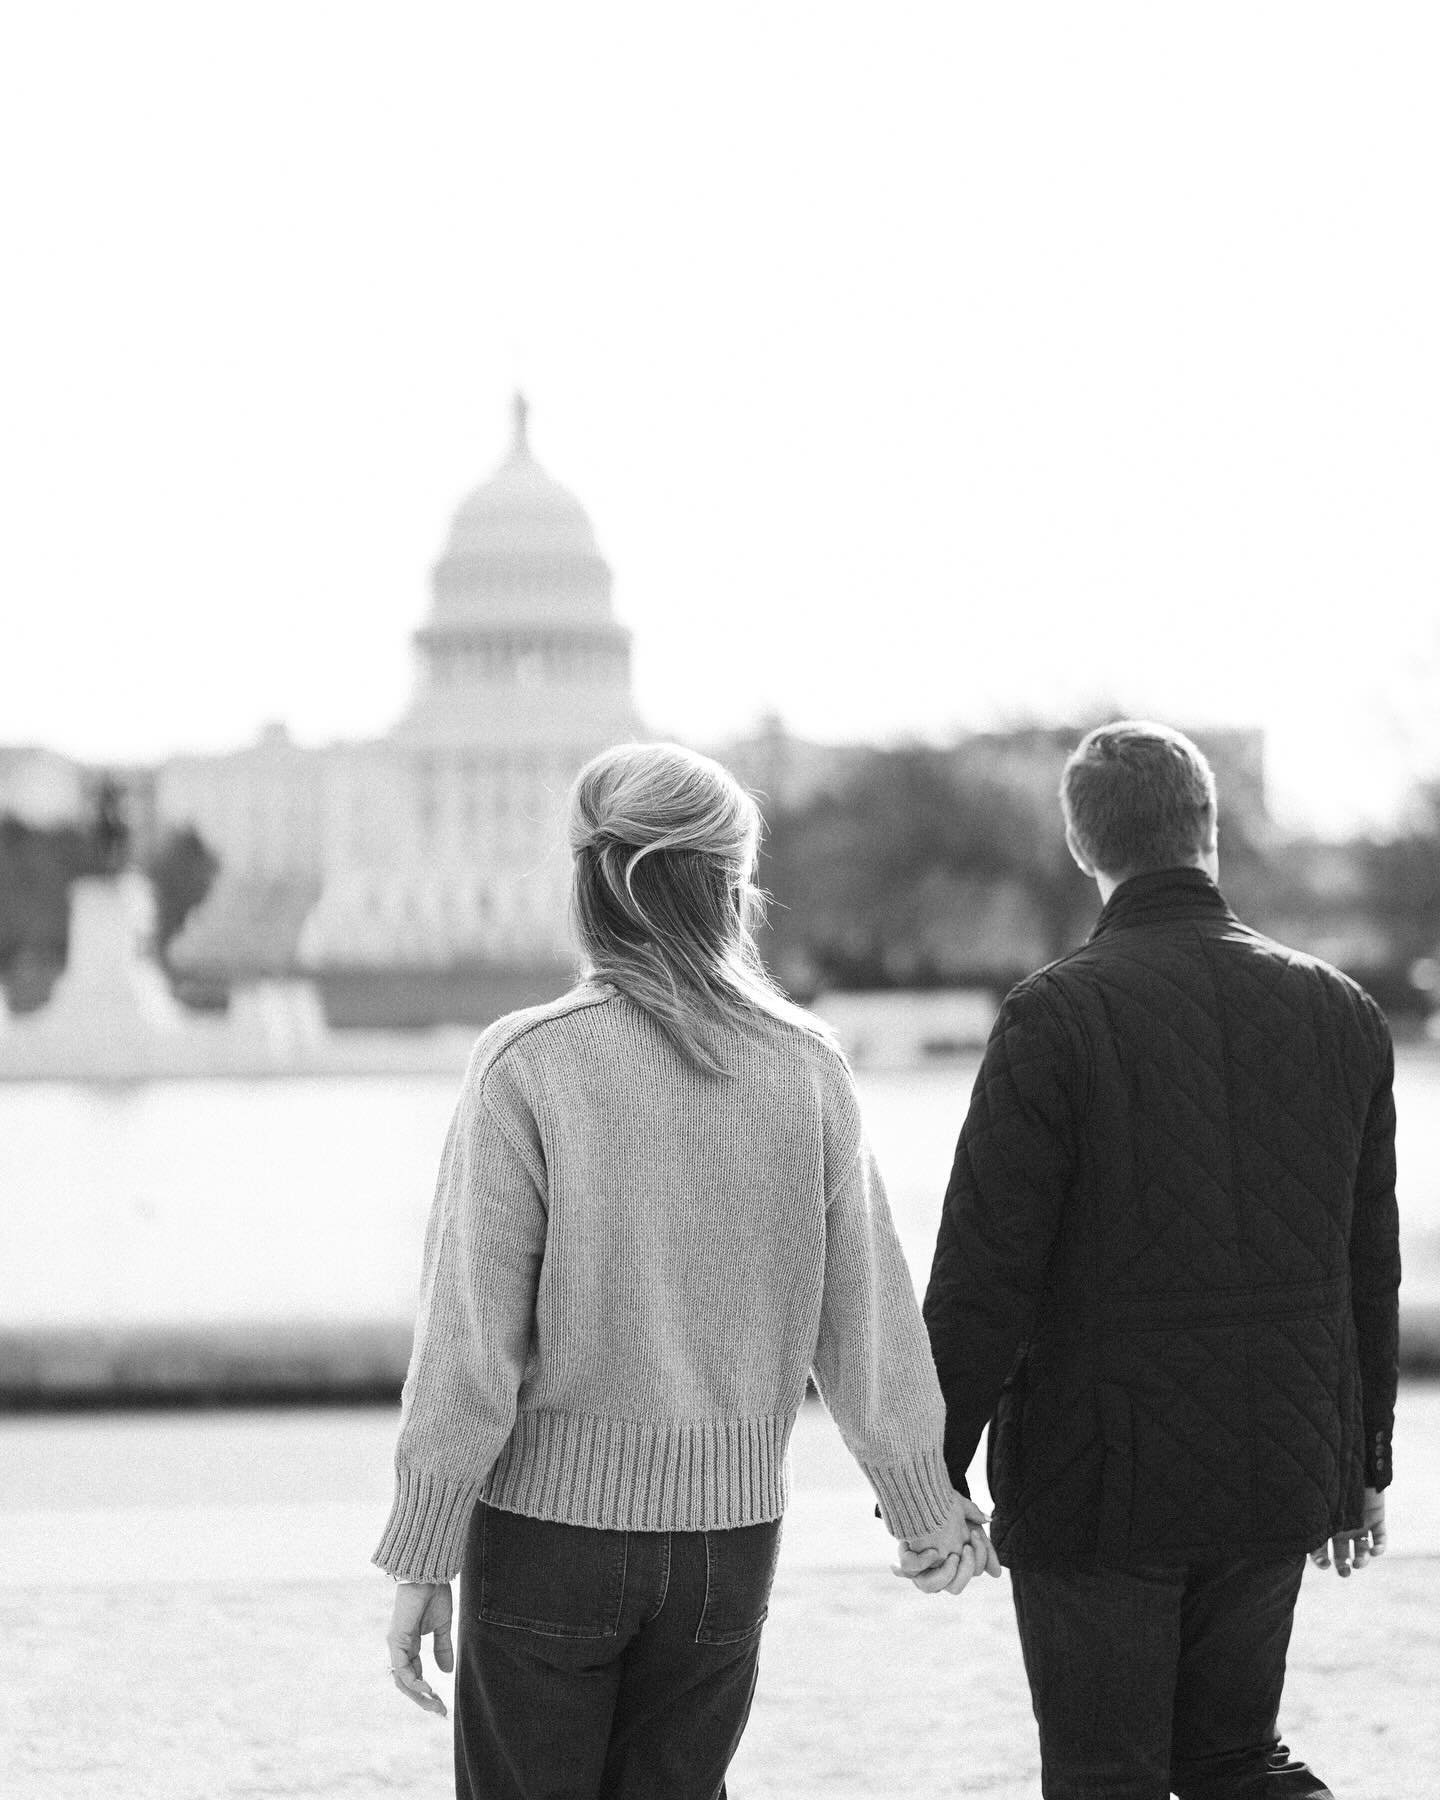 Another example of tying a meaningful location into your wedding photography story - Sarah and Brian live in DC but are getting married in Louisville. A session in DC was the perfect opportunity to document their life together there before we shift o